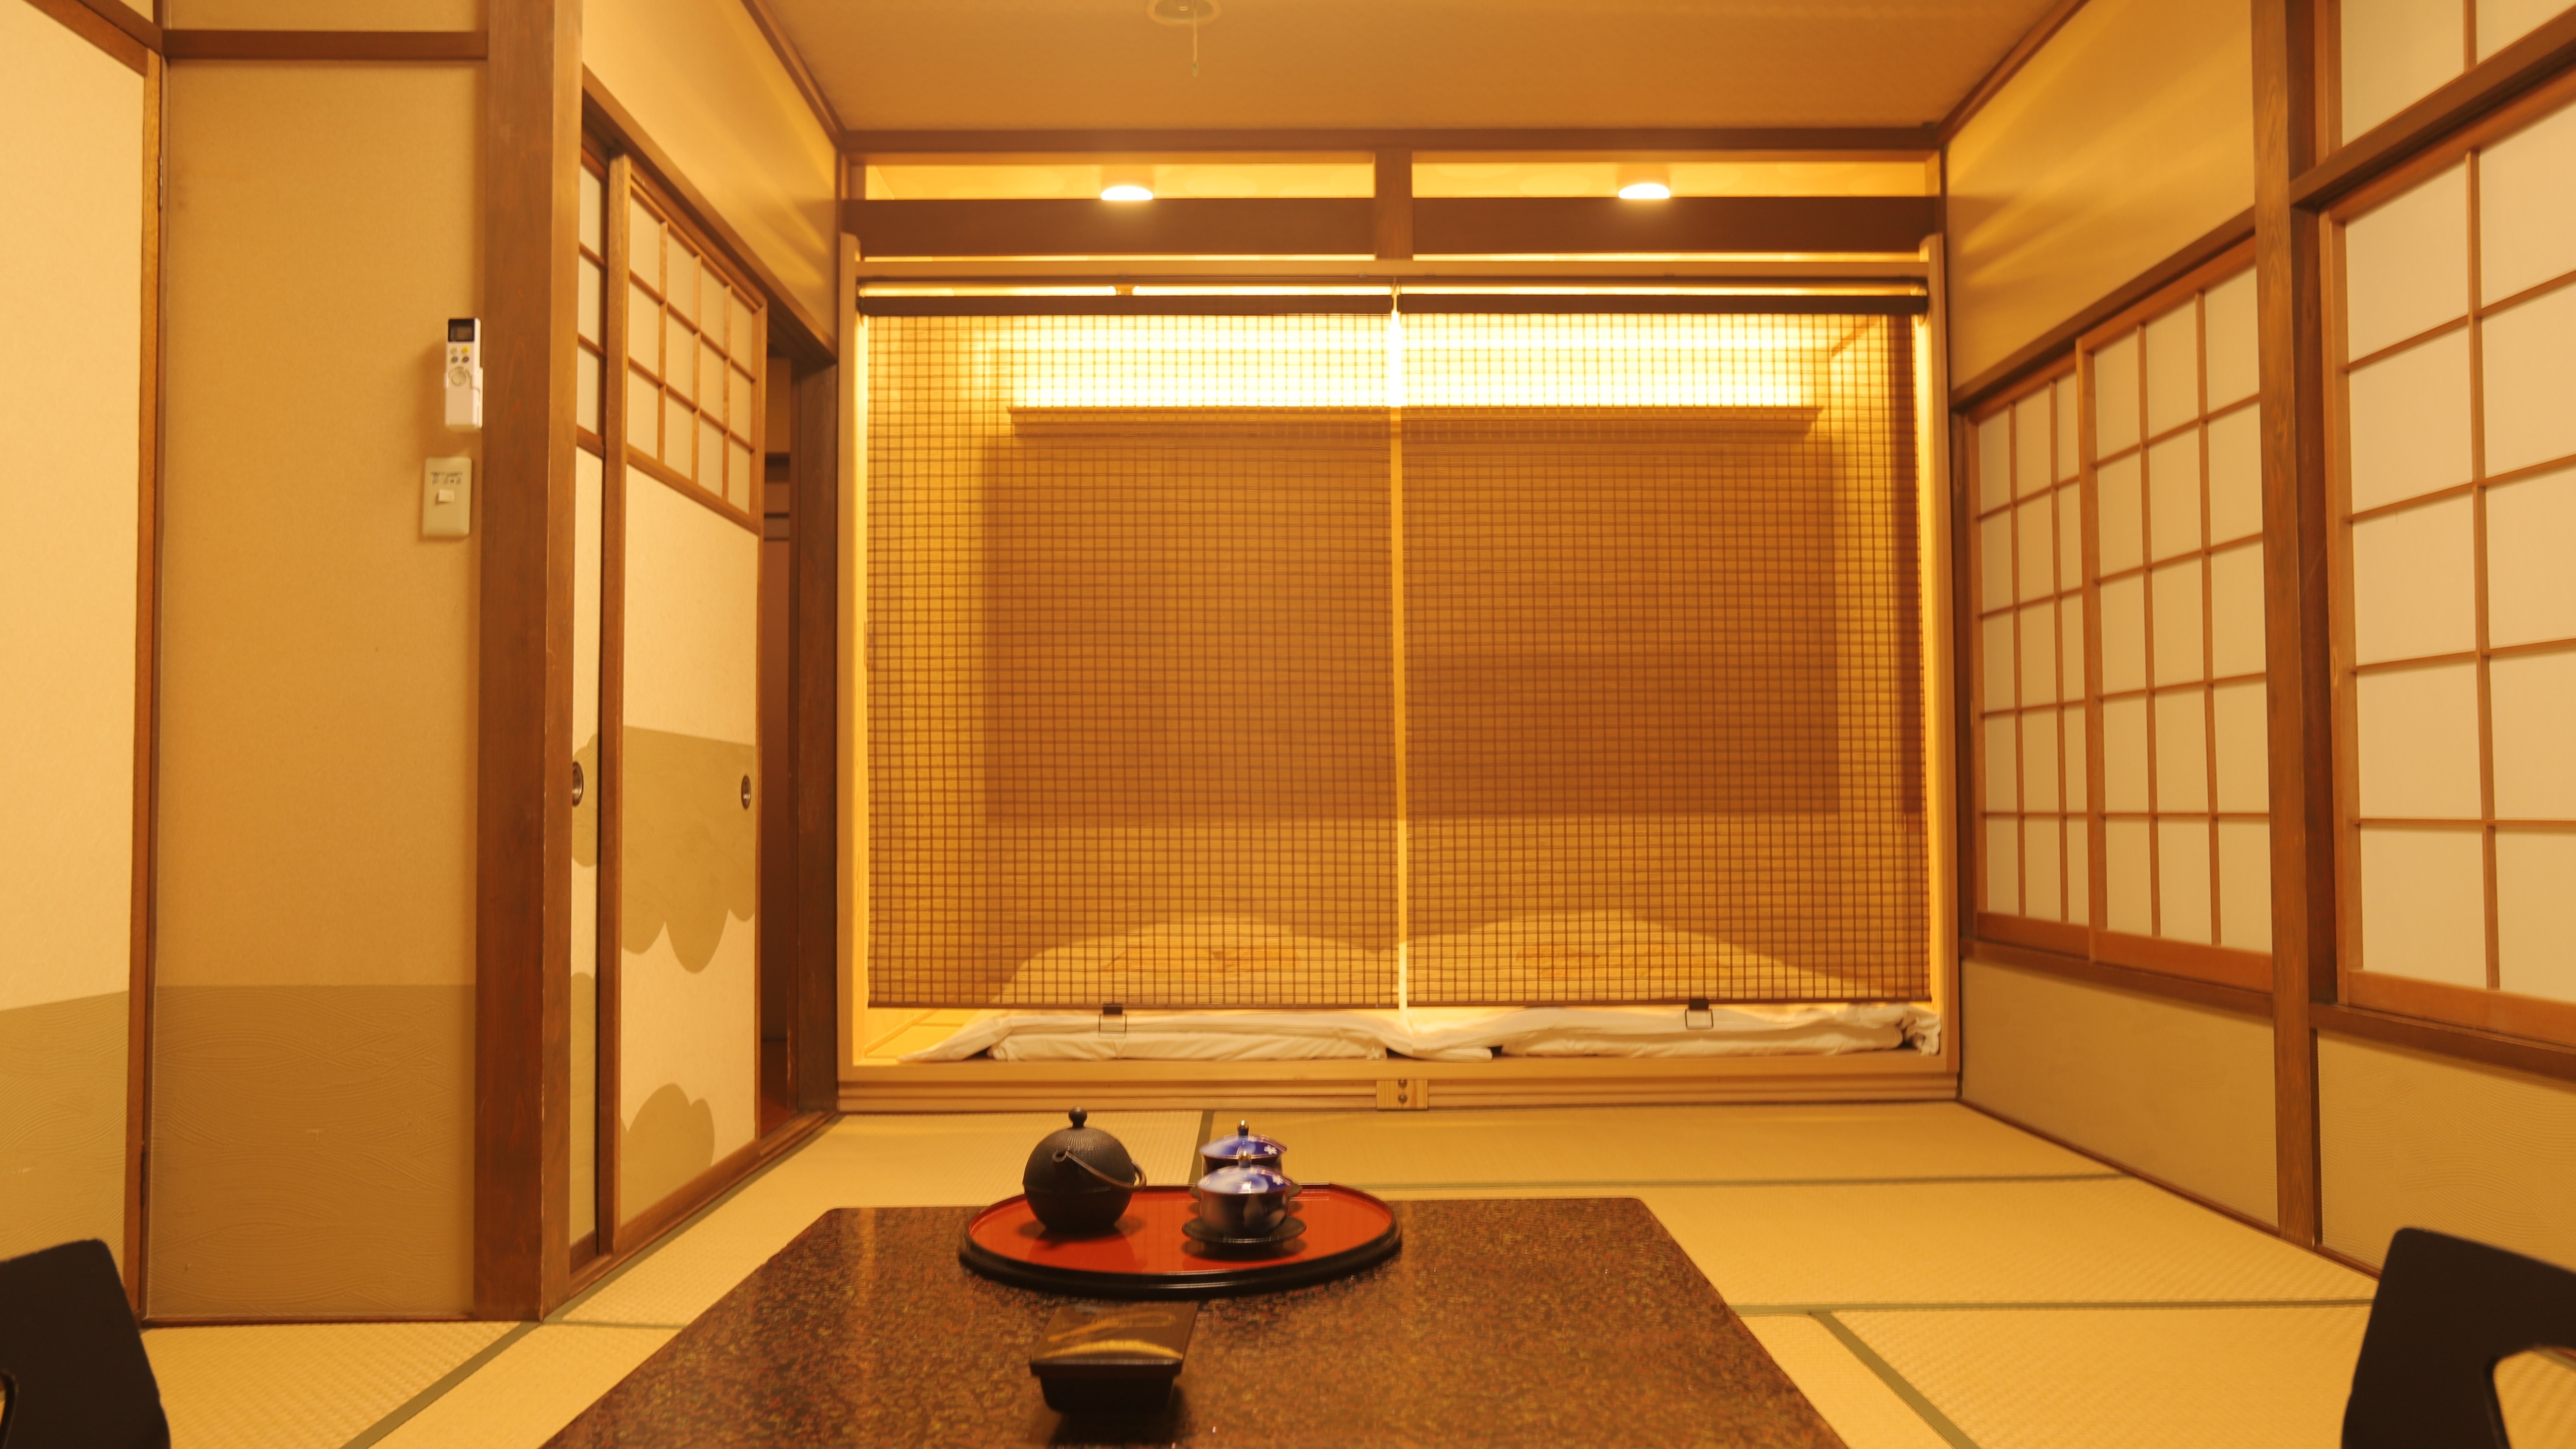 An example of a 10 tatami Japanese-style room